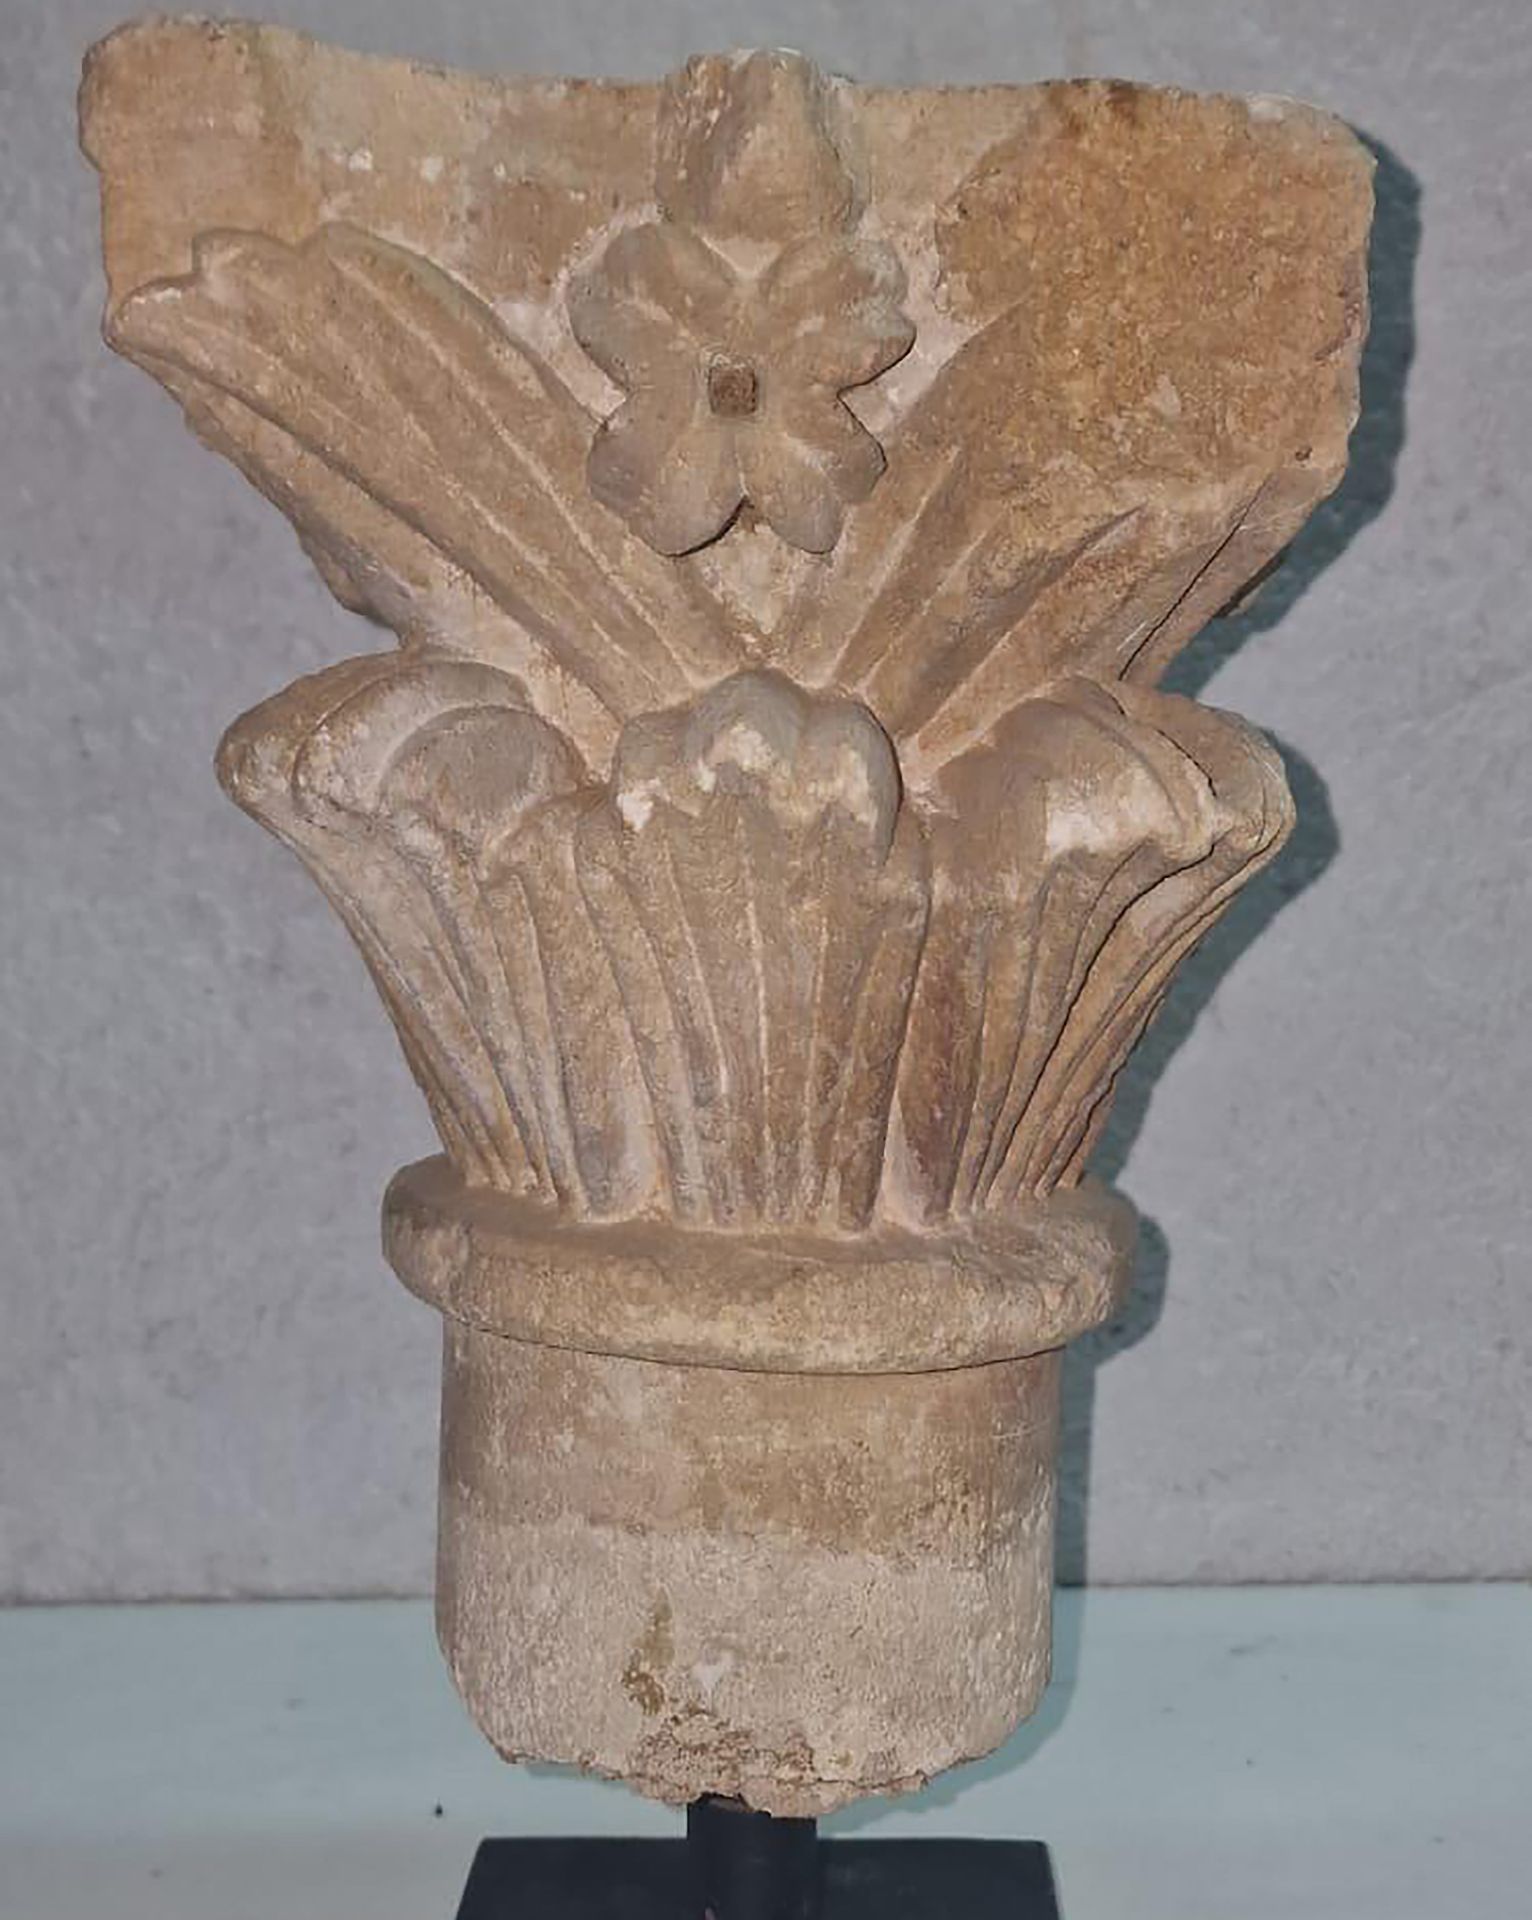 Late Capital - Catalan Romanesque in stone, 13th - 14th centuries